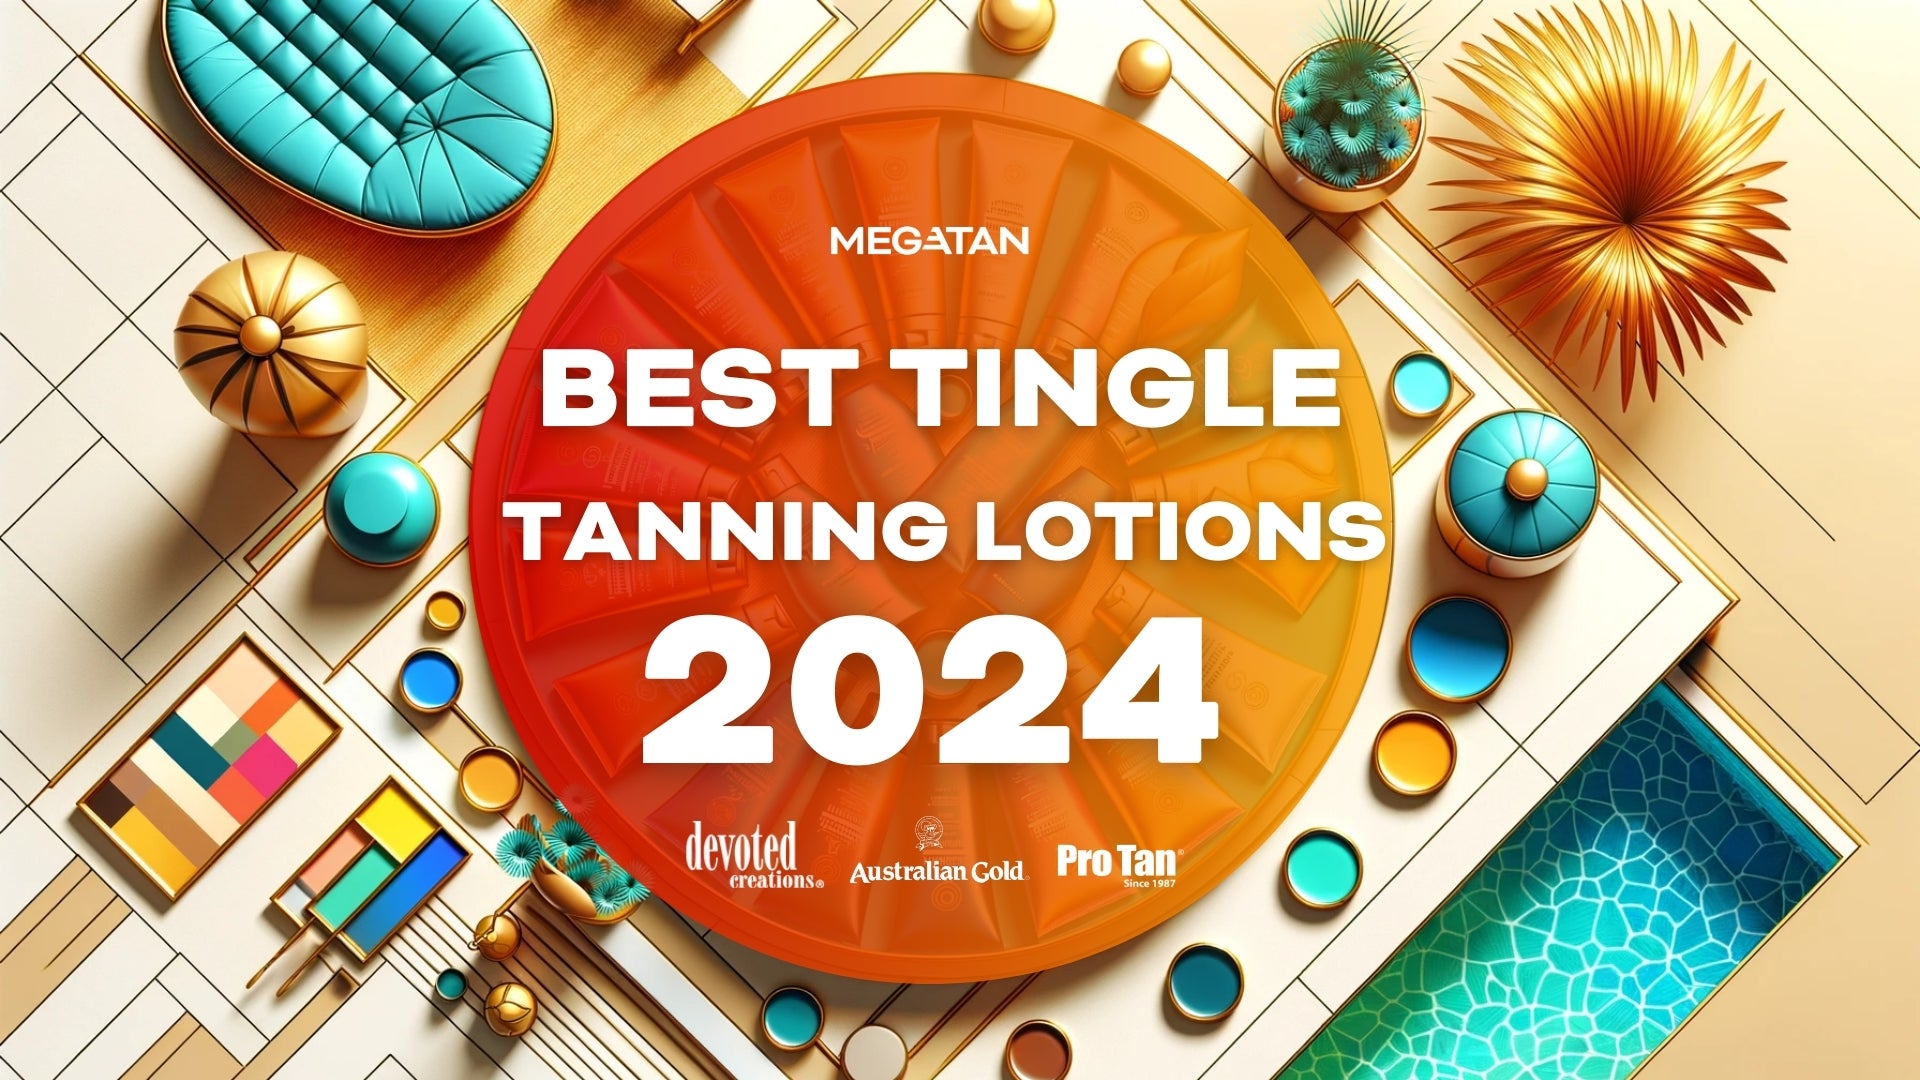 Discover the Best Tingle Tanning Lotions of 2024